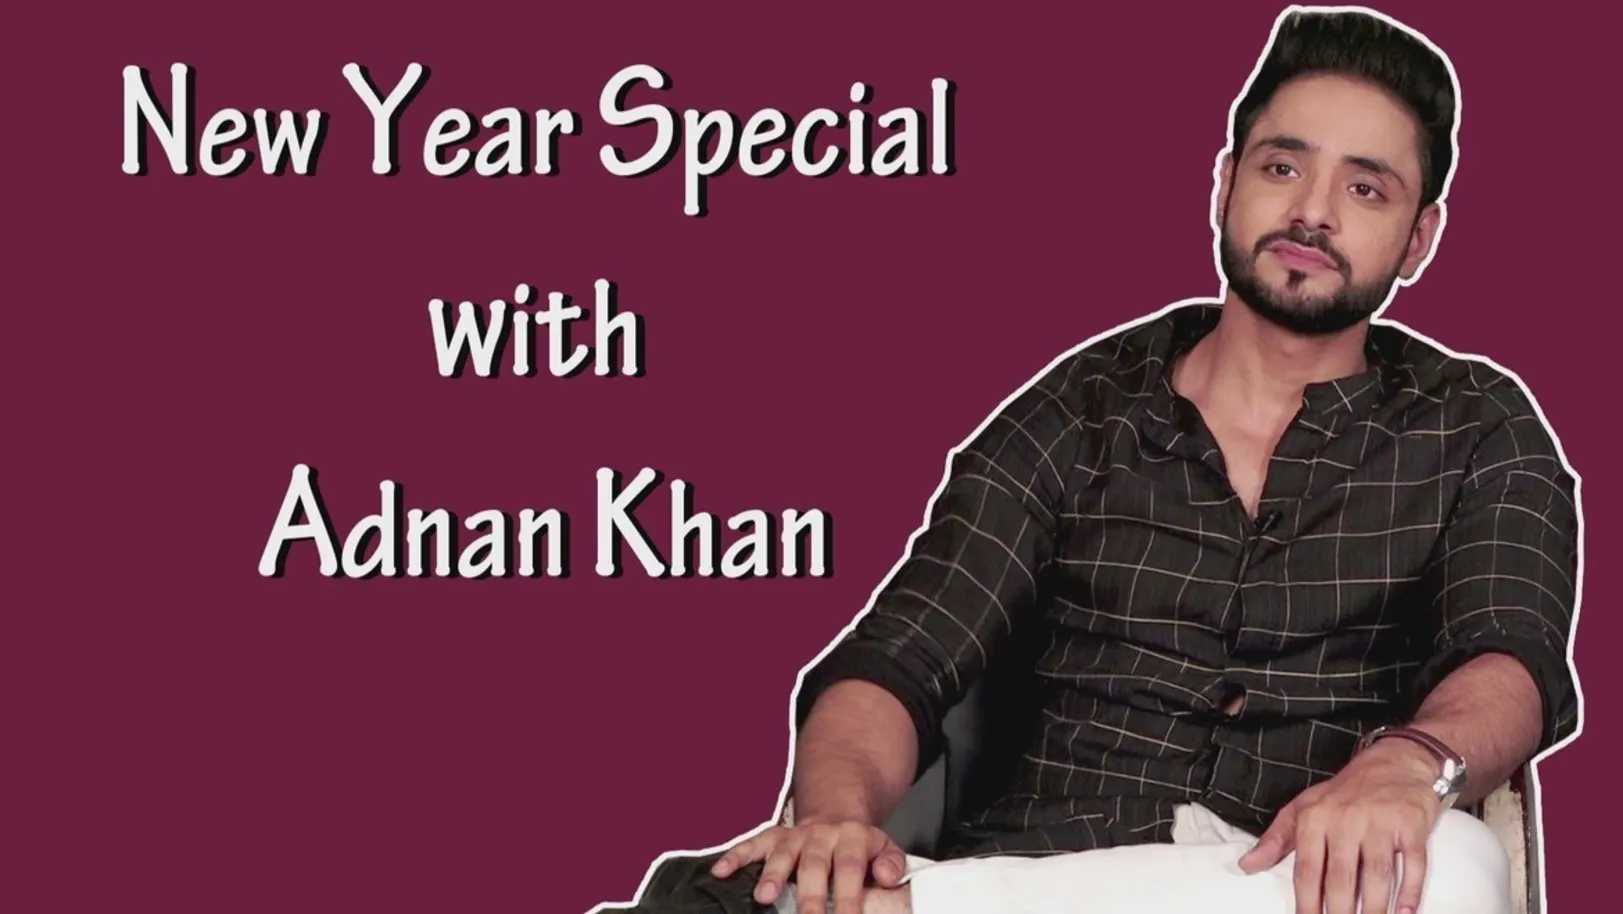 New Year Special with Adnan Khan 